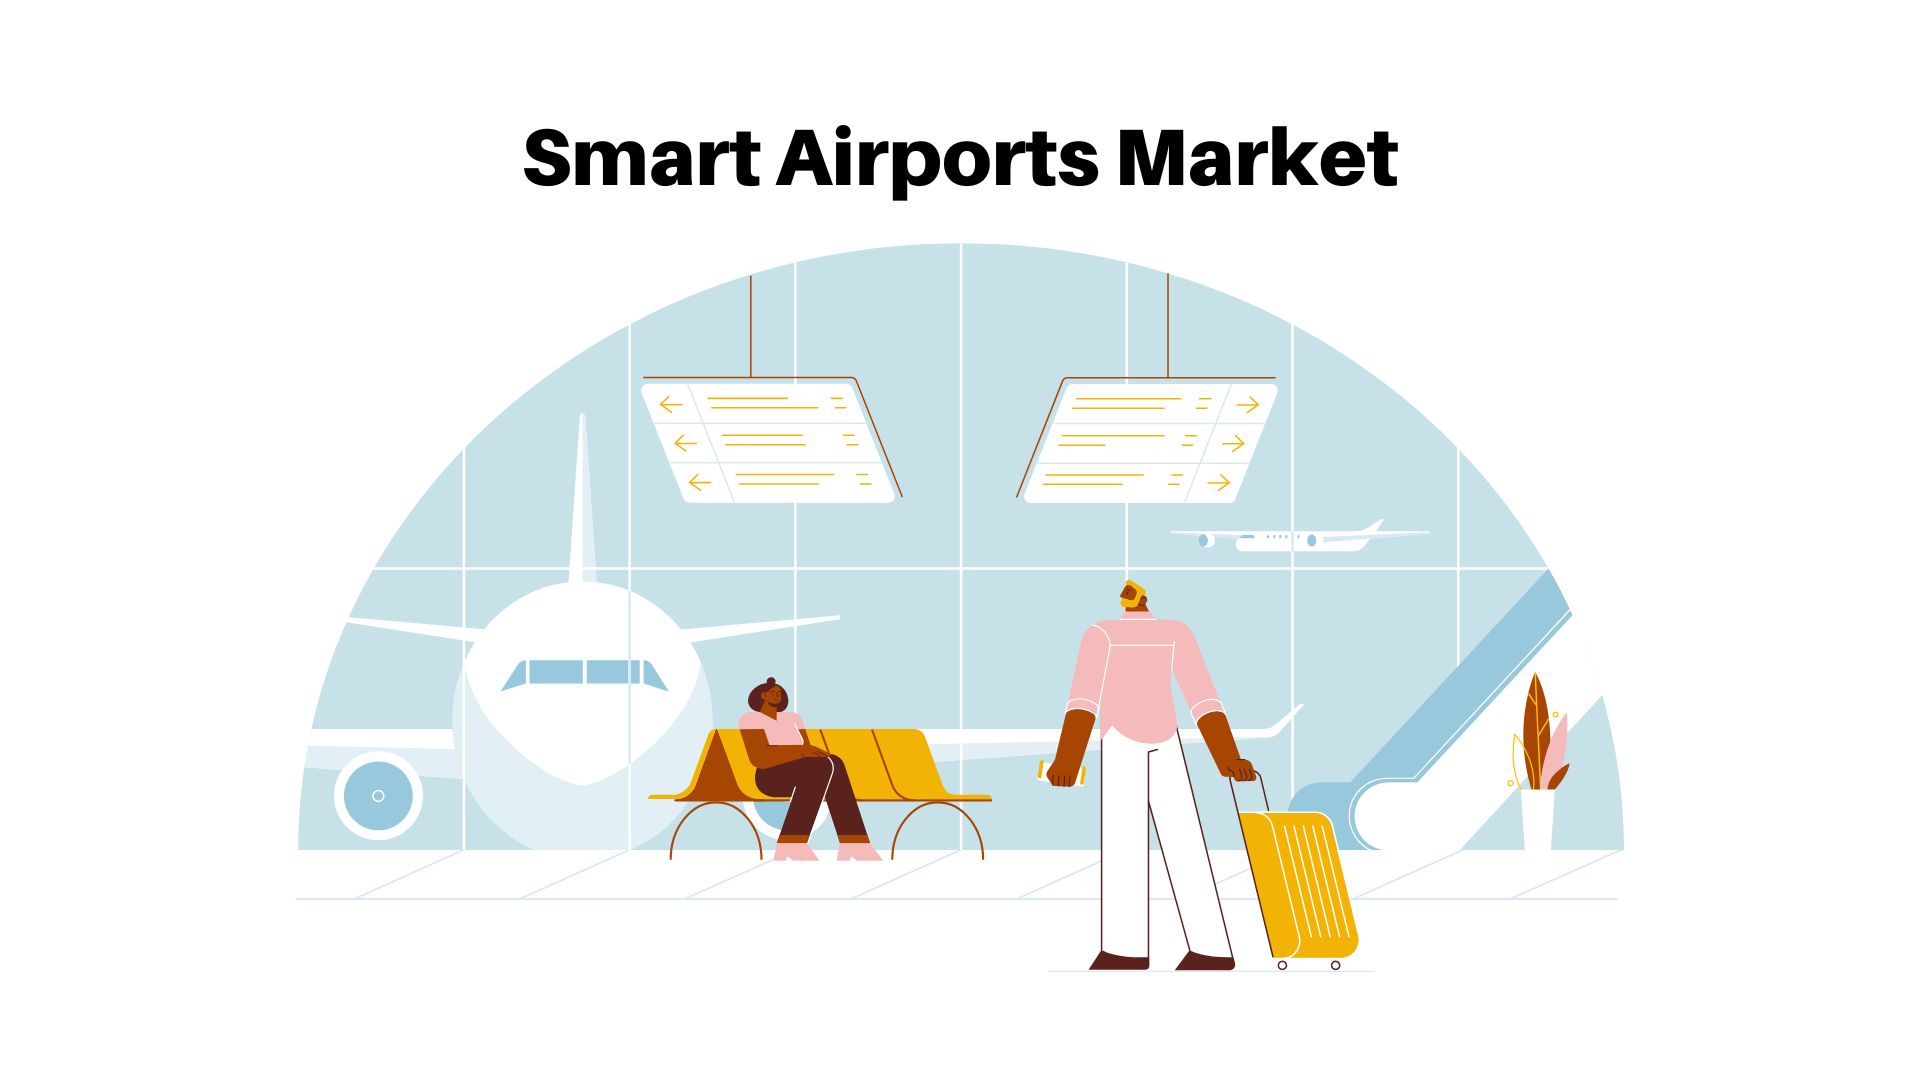 Smart Airports Market is projected to reach USD 7.7 Billion by 2033 | CAGR of 9.7%